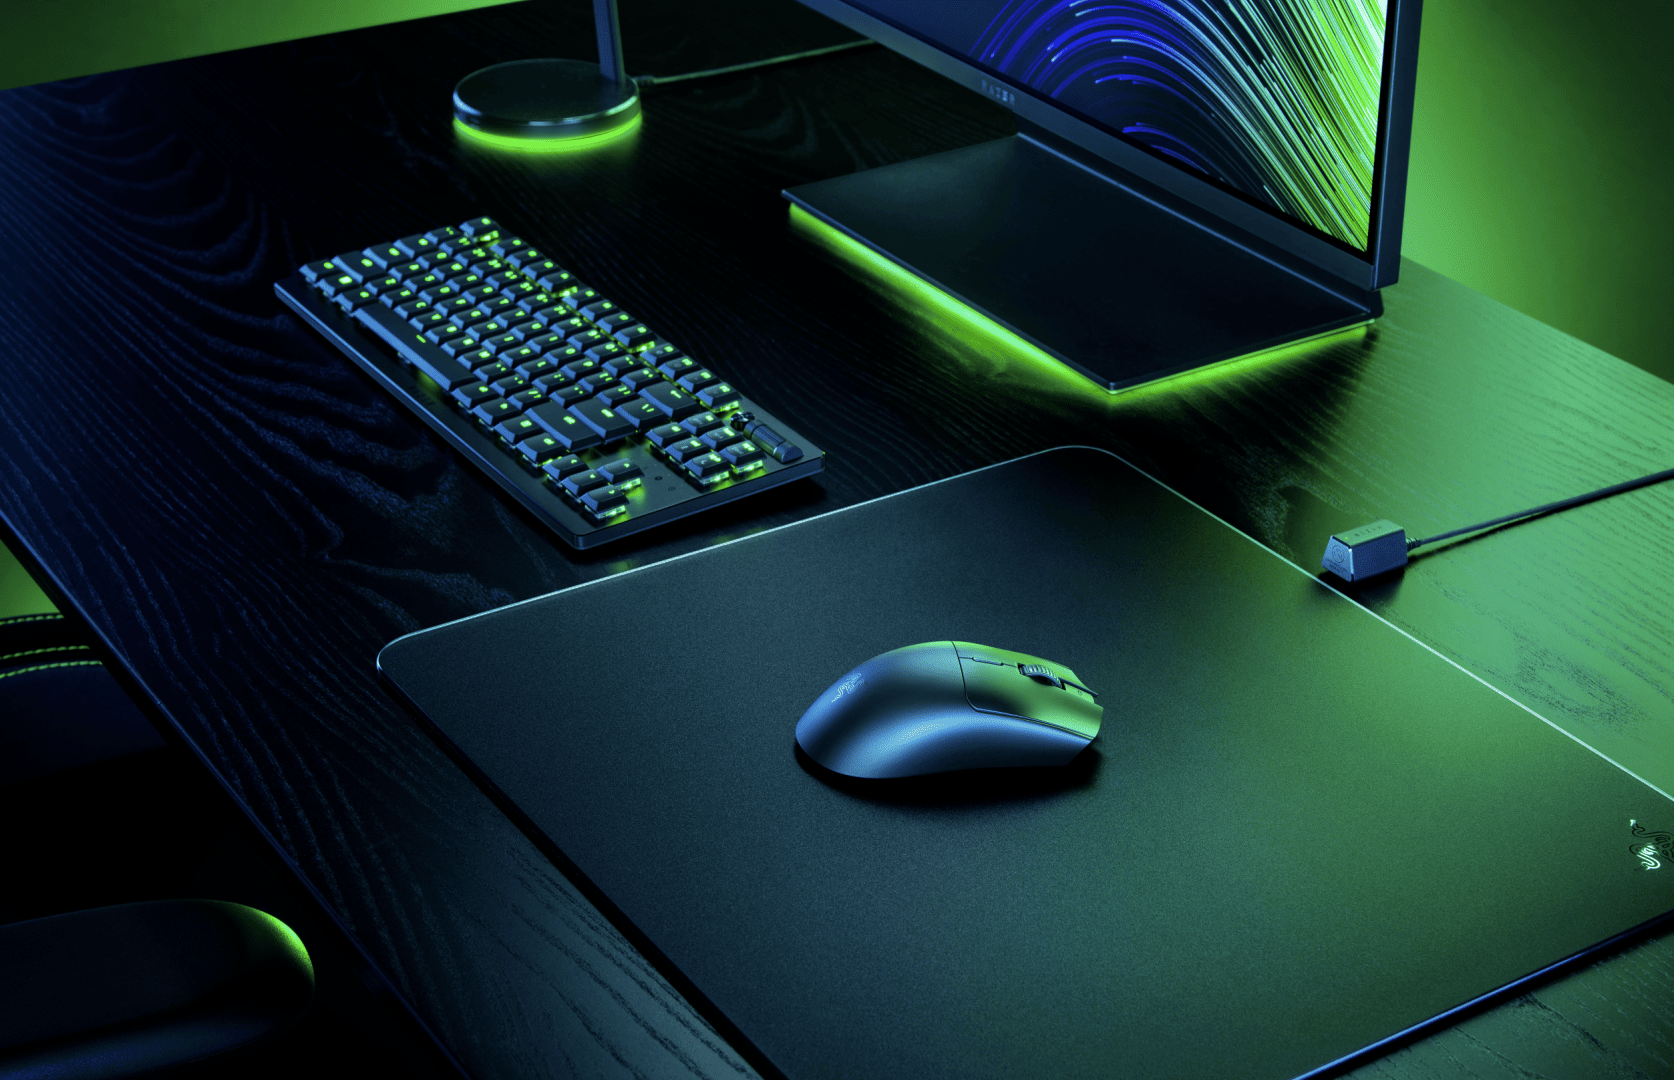 Razer announces a new wireless gaming mouse, the Razer Viper V3 HyperSpeed, powered by a single AA battery